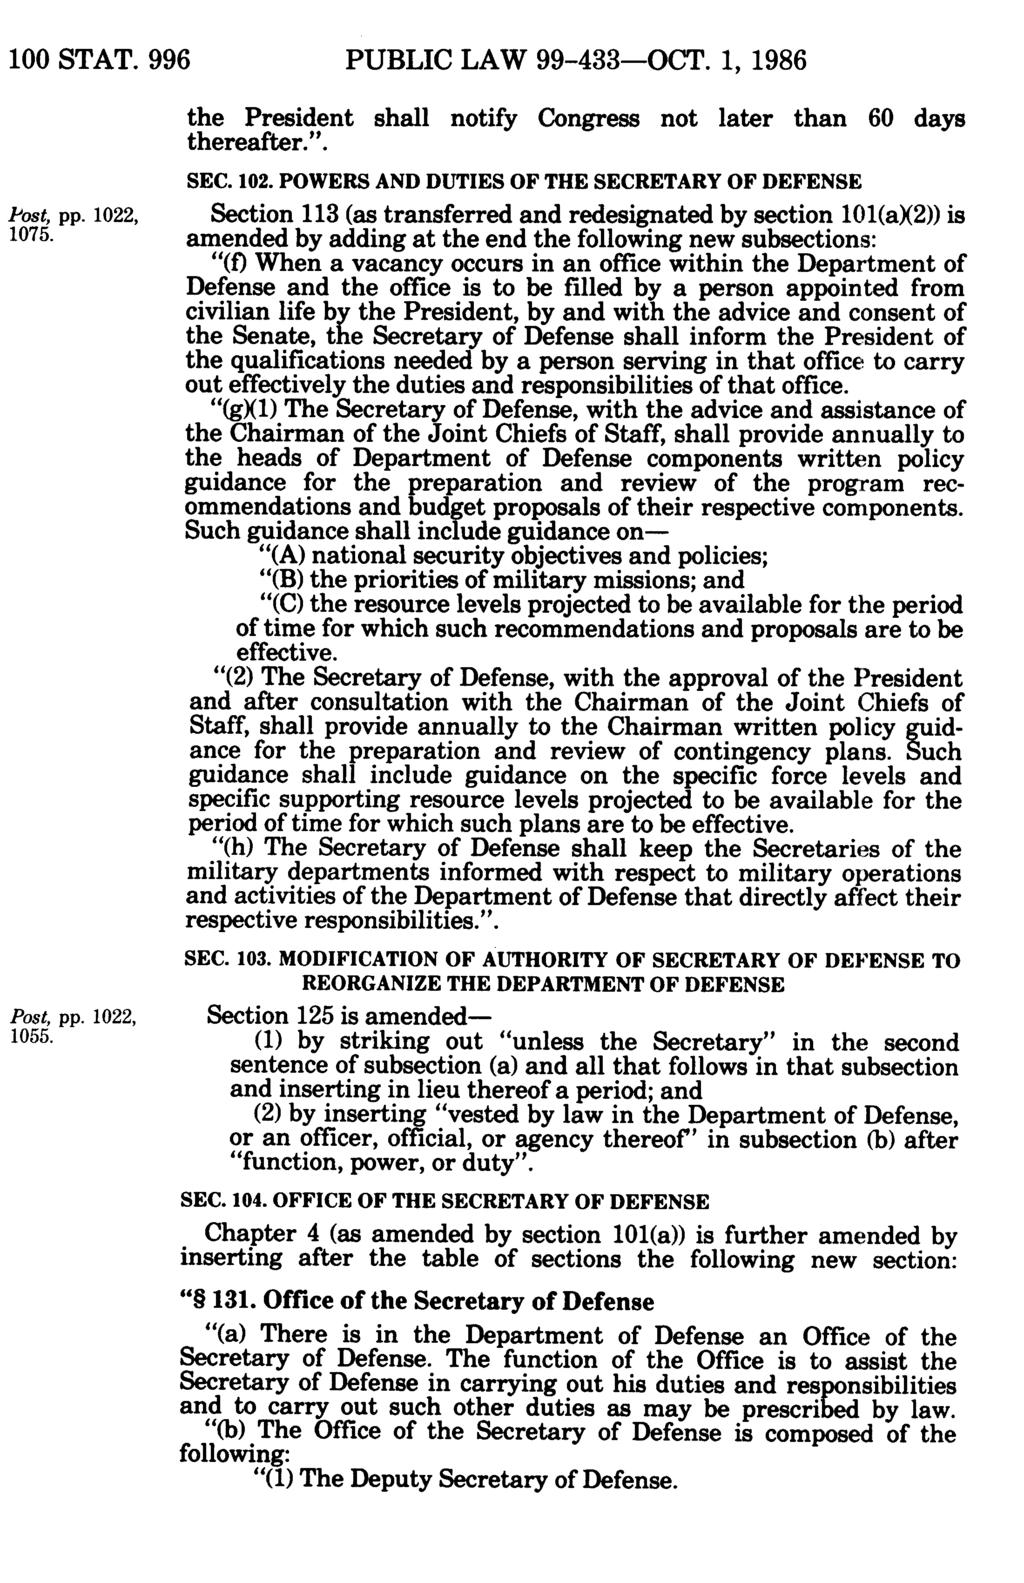 100 STAT. 996 PUBLIC LAW 99-433-OCT. 1, 1986 the President shall thereafter.. notify Congress not later than 60 days SEC. 102. POWERS AND DUTIES OF THE SECRETARY OF DEFENSE Post, pp.